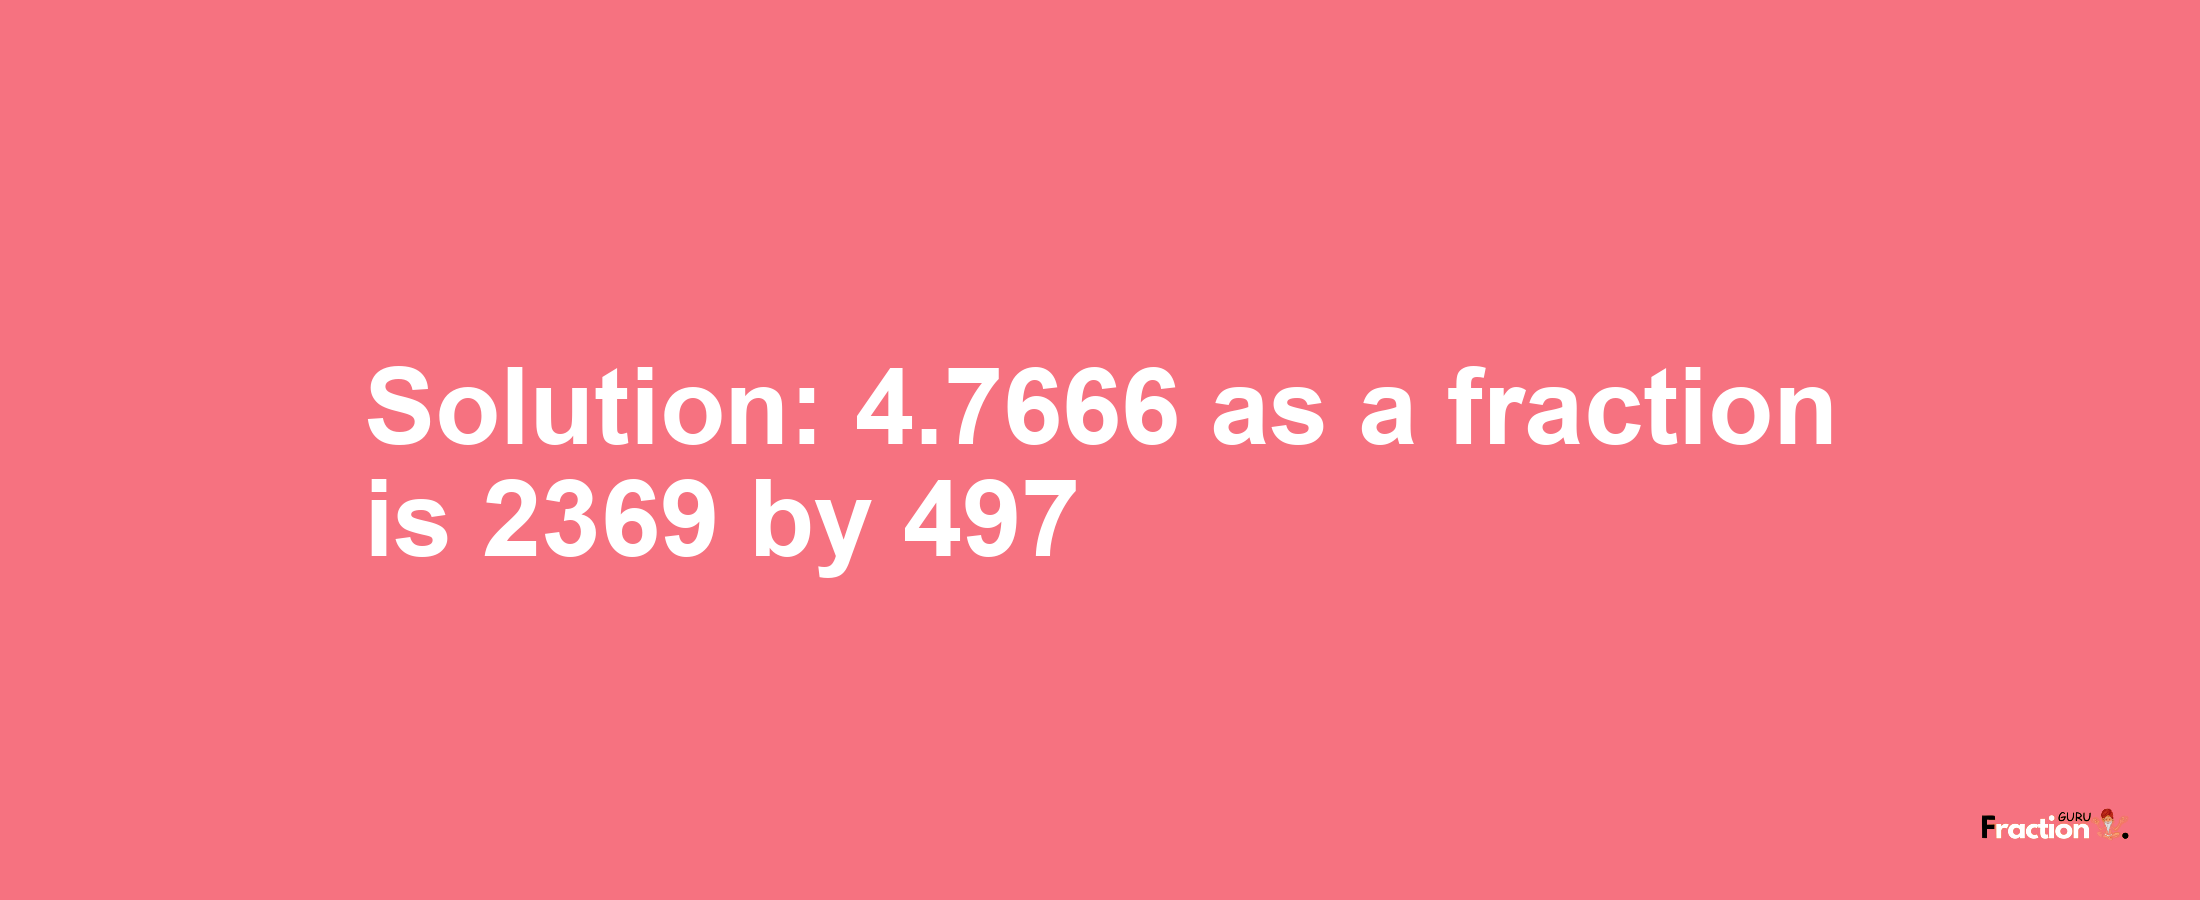 Solution:4.7666 as a fraction is 2369/497